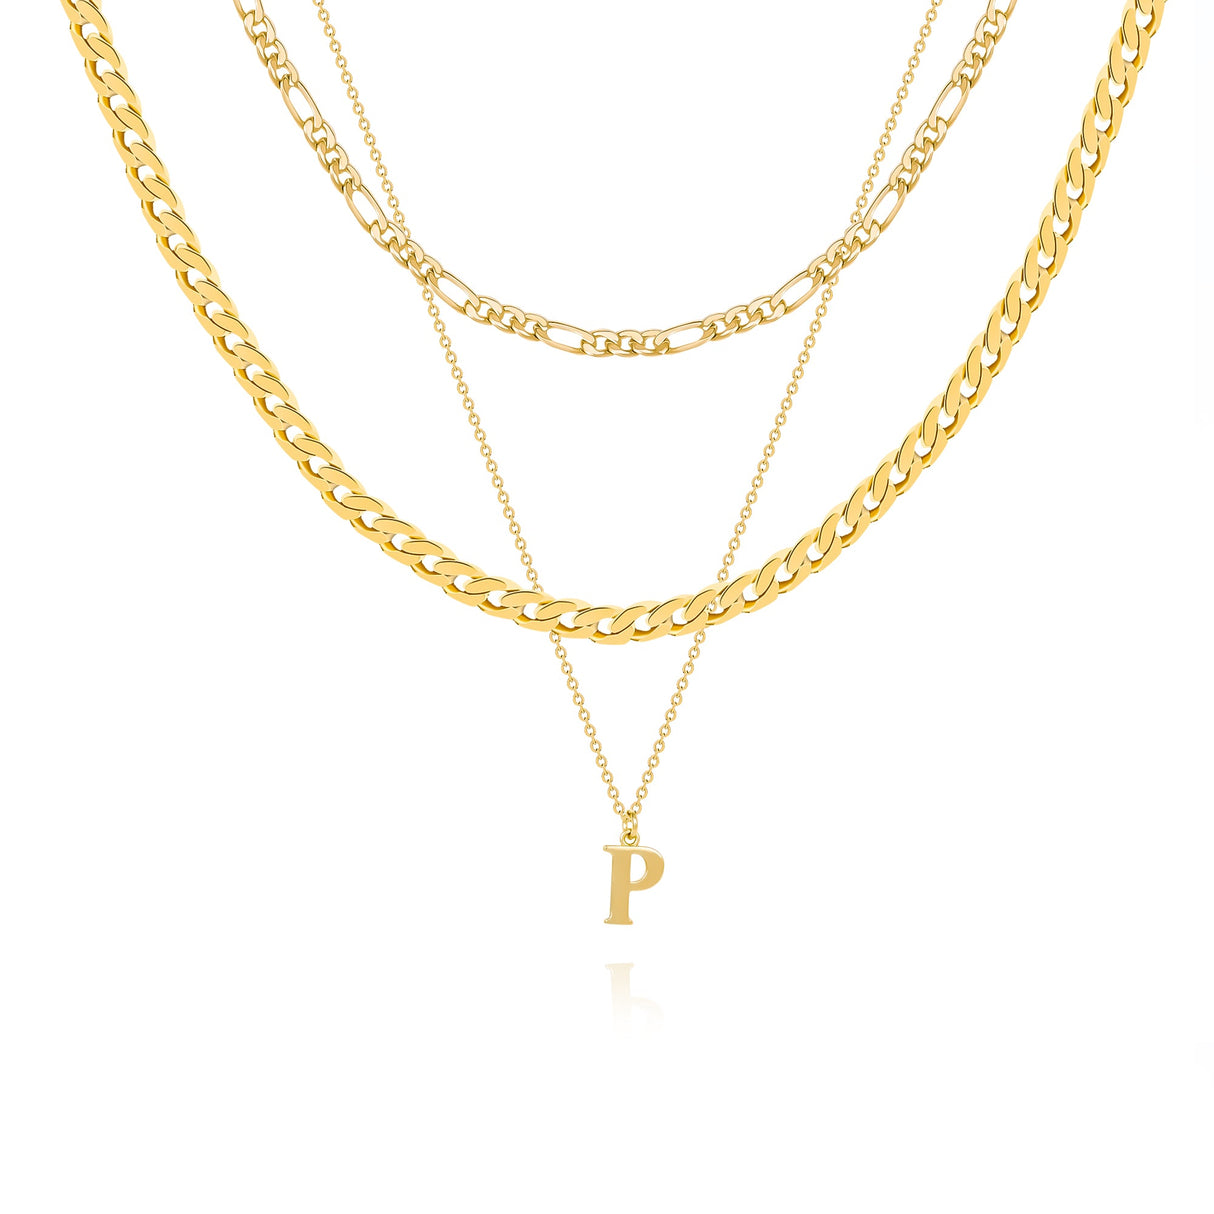 14K Gold Plated Layered Initial Necklace - GexWorldwide